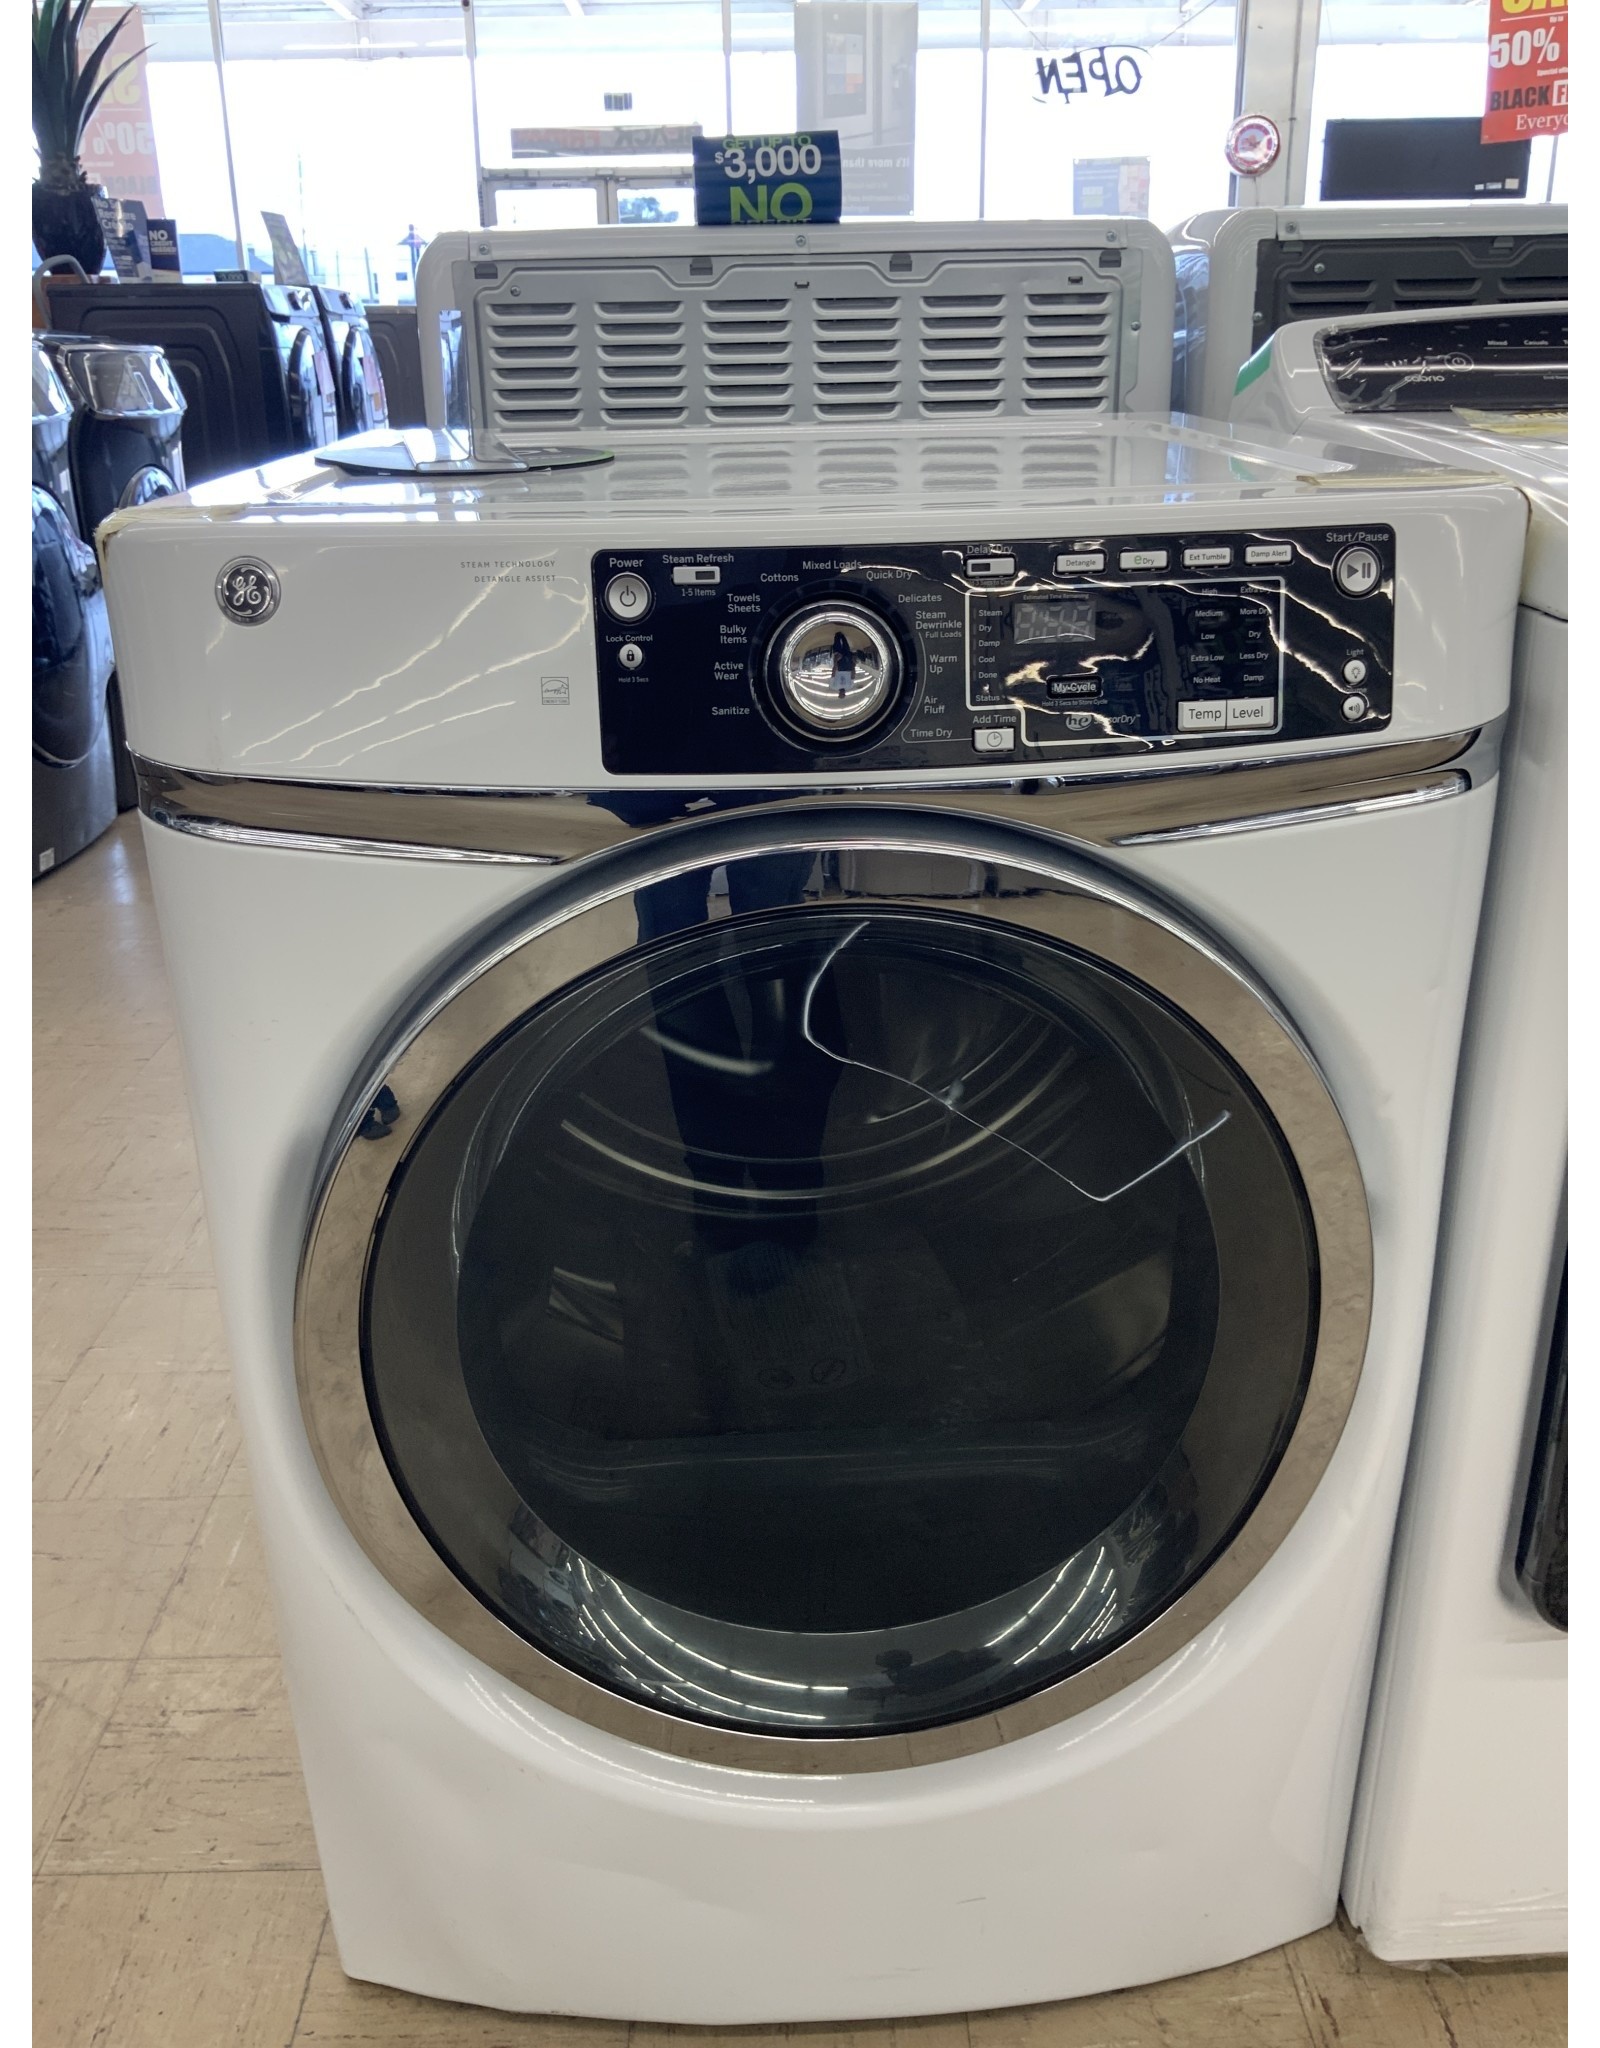 GE GFD48ESSKWW 8.3 cu. ft. 240 Volt White Stackable Electric Vented Dryer with Steam, ENERGY STAR